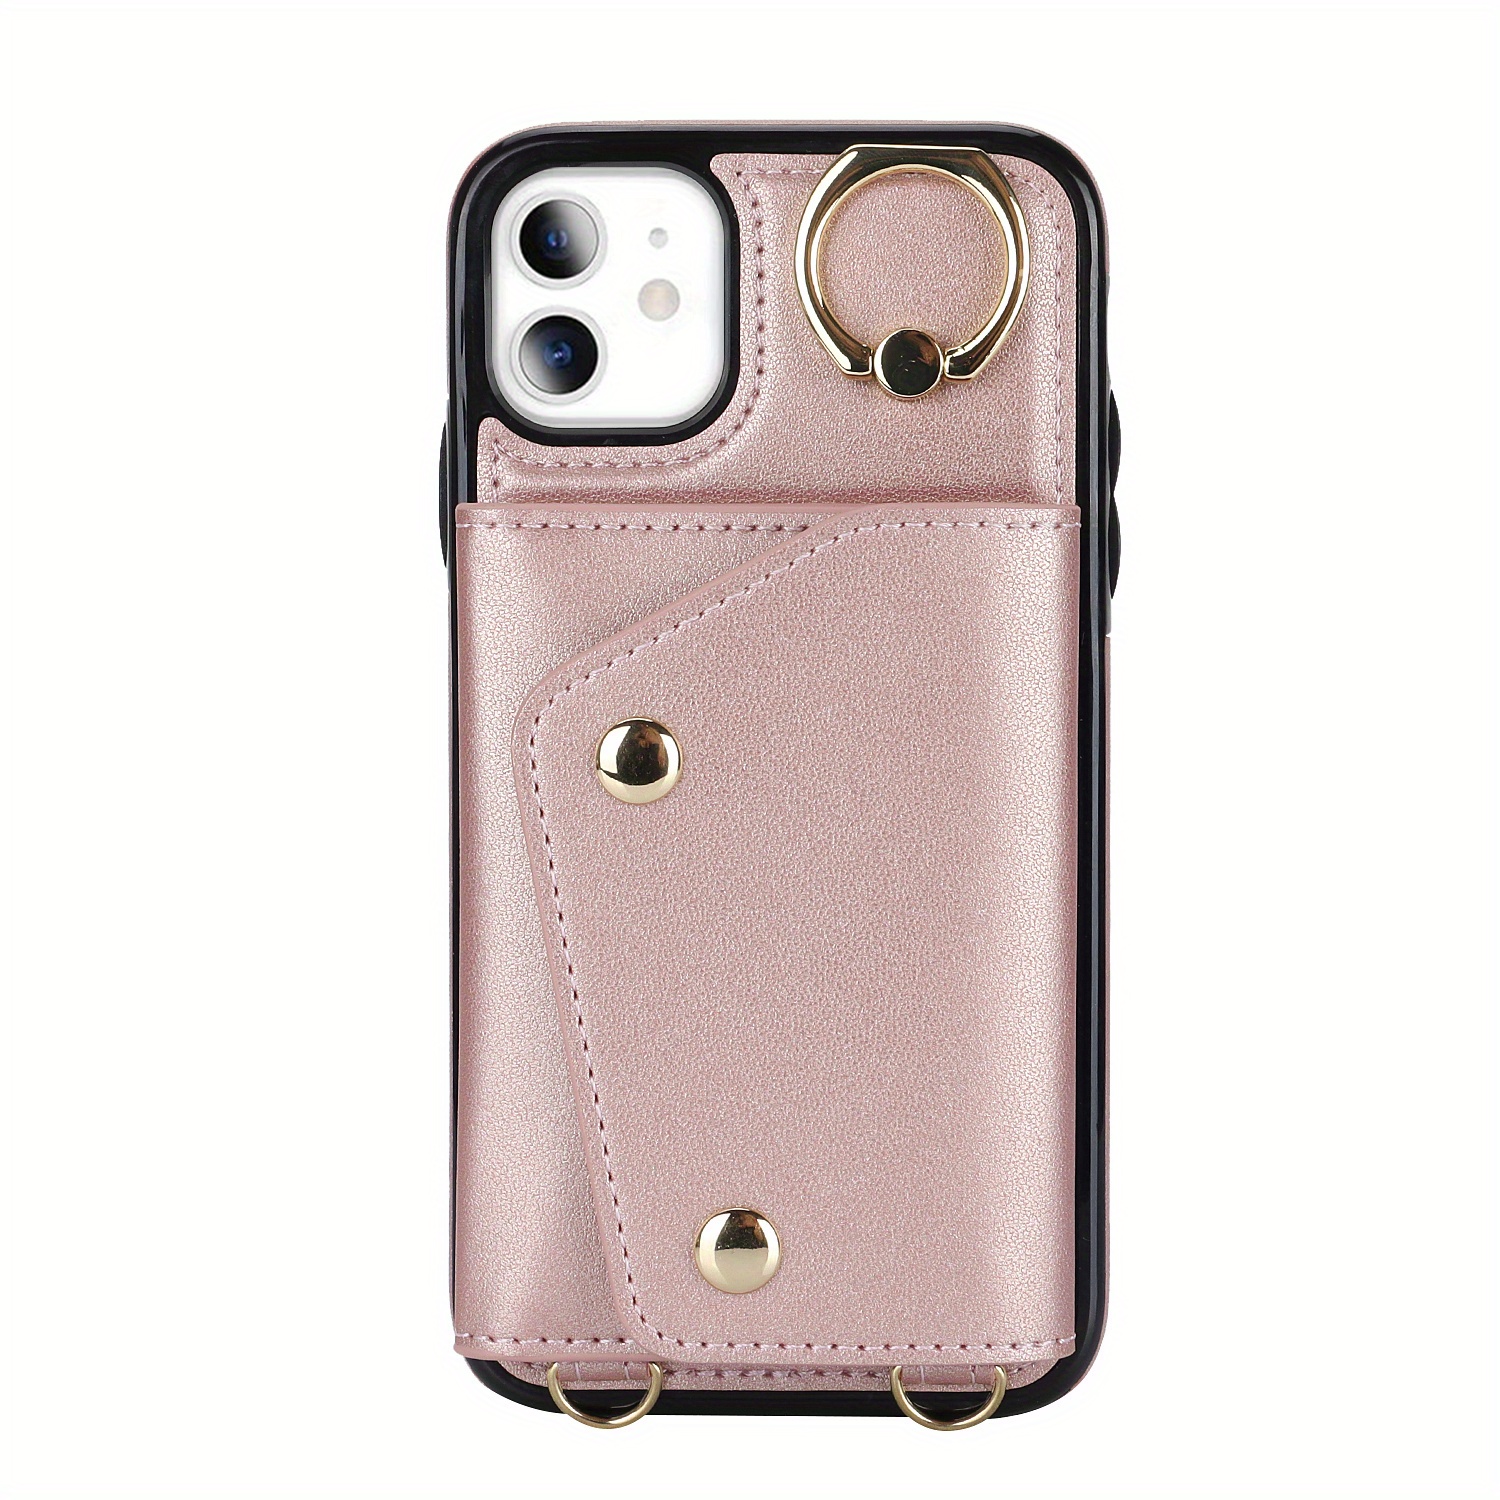 Designer Phone Cases Fashion Cell Cover Pu Leather High Quality Full Body  Protective For Iphone15 14 13 Iphone 12 Pro MINI 11 XR XS Max 7/8 Plus  Samsung S20 S10 NOTE 8 9 10 From Majatic, $9.92